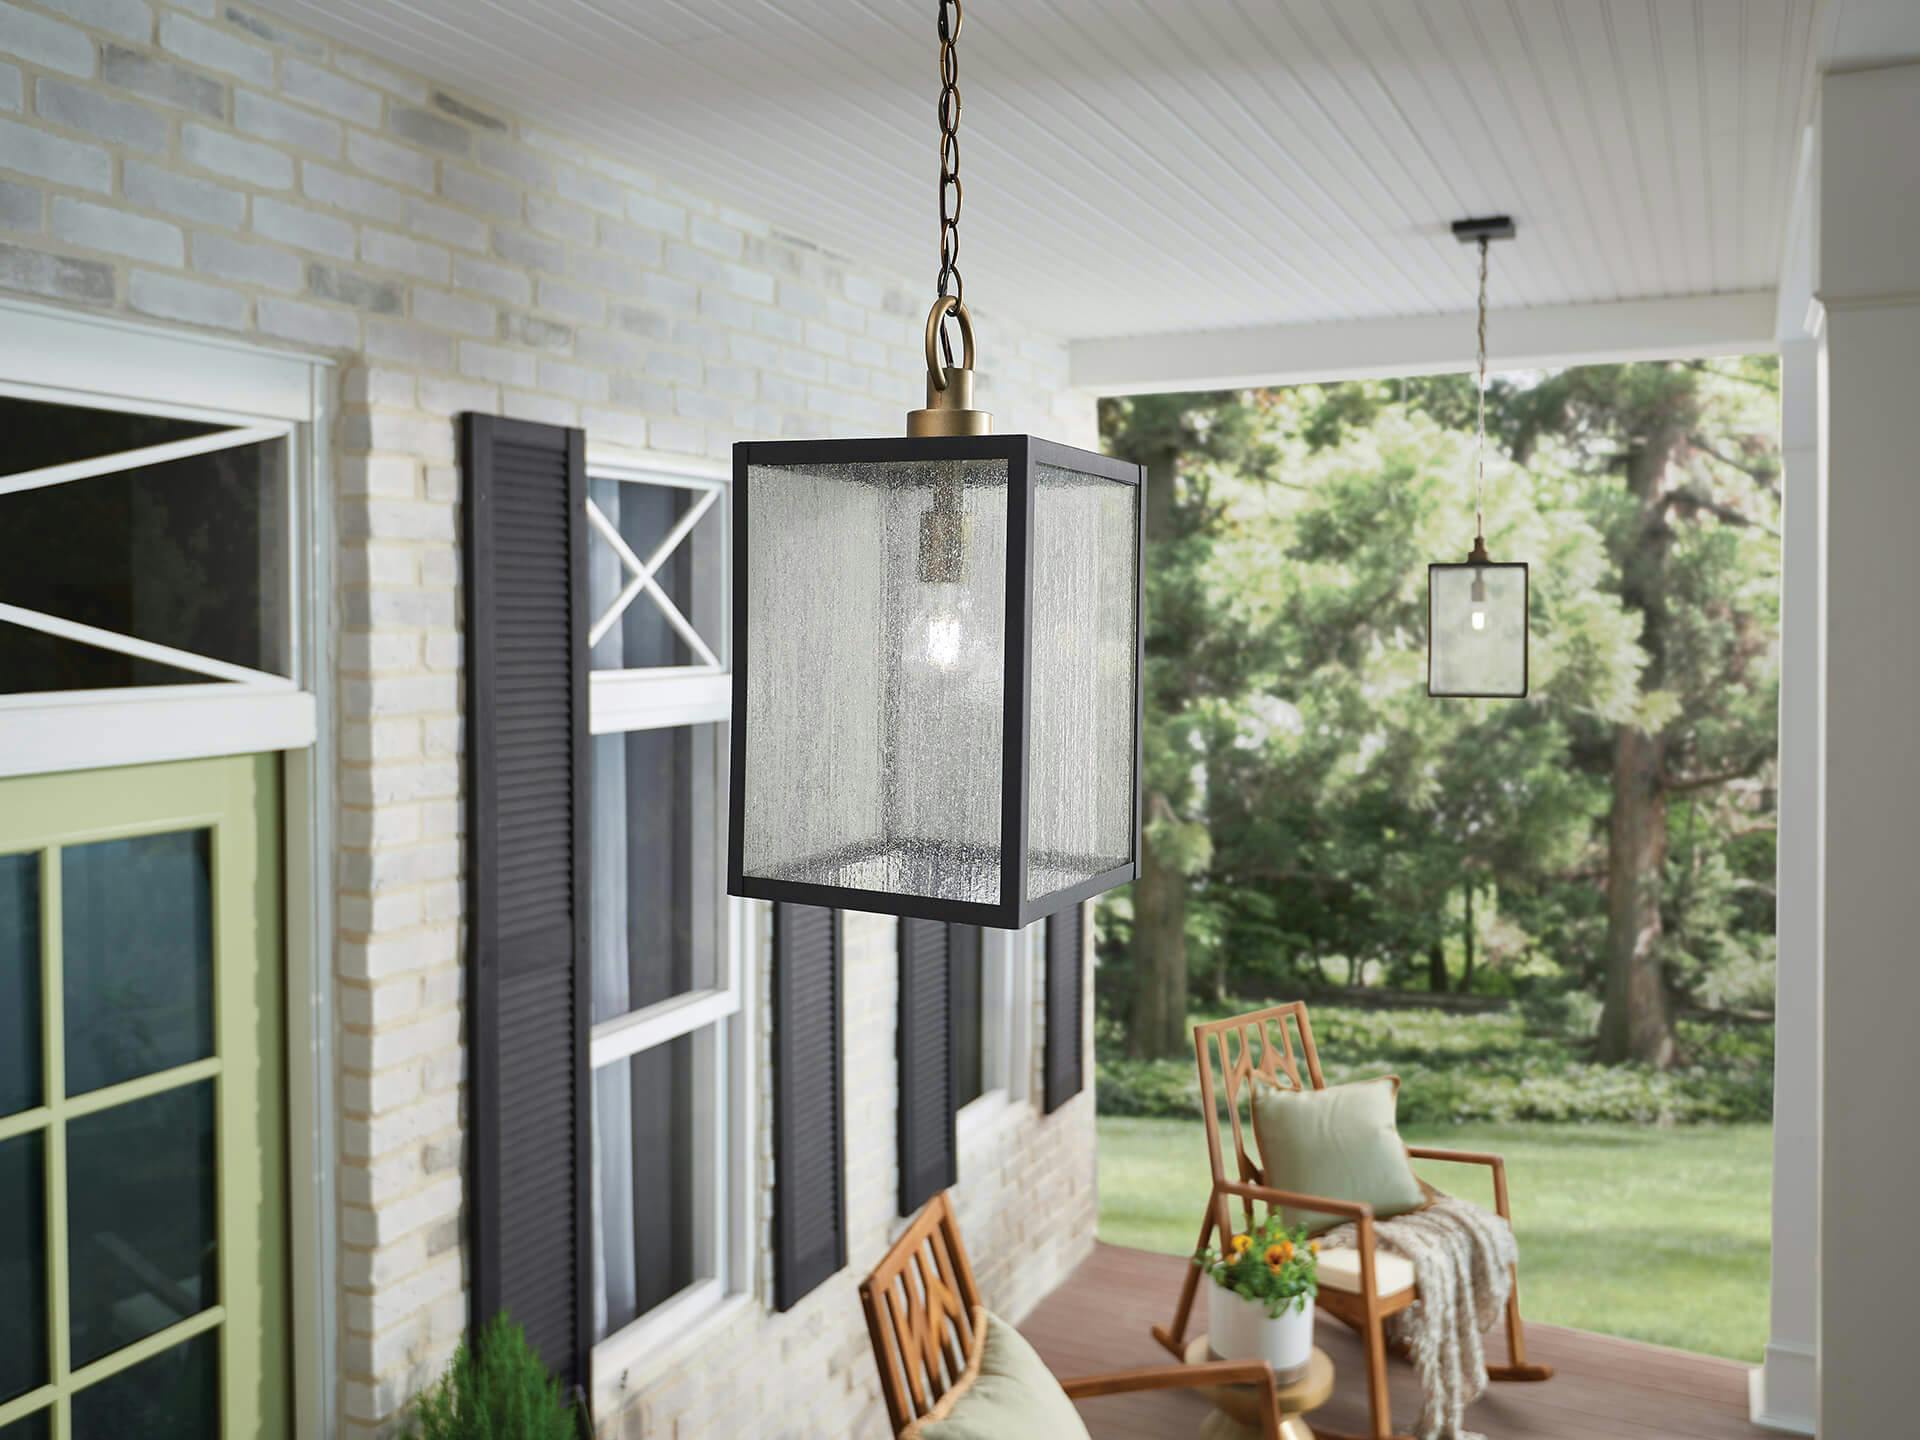 Porch scene with a close-up on two lit Lahden pendants hung in a row